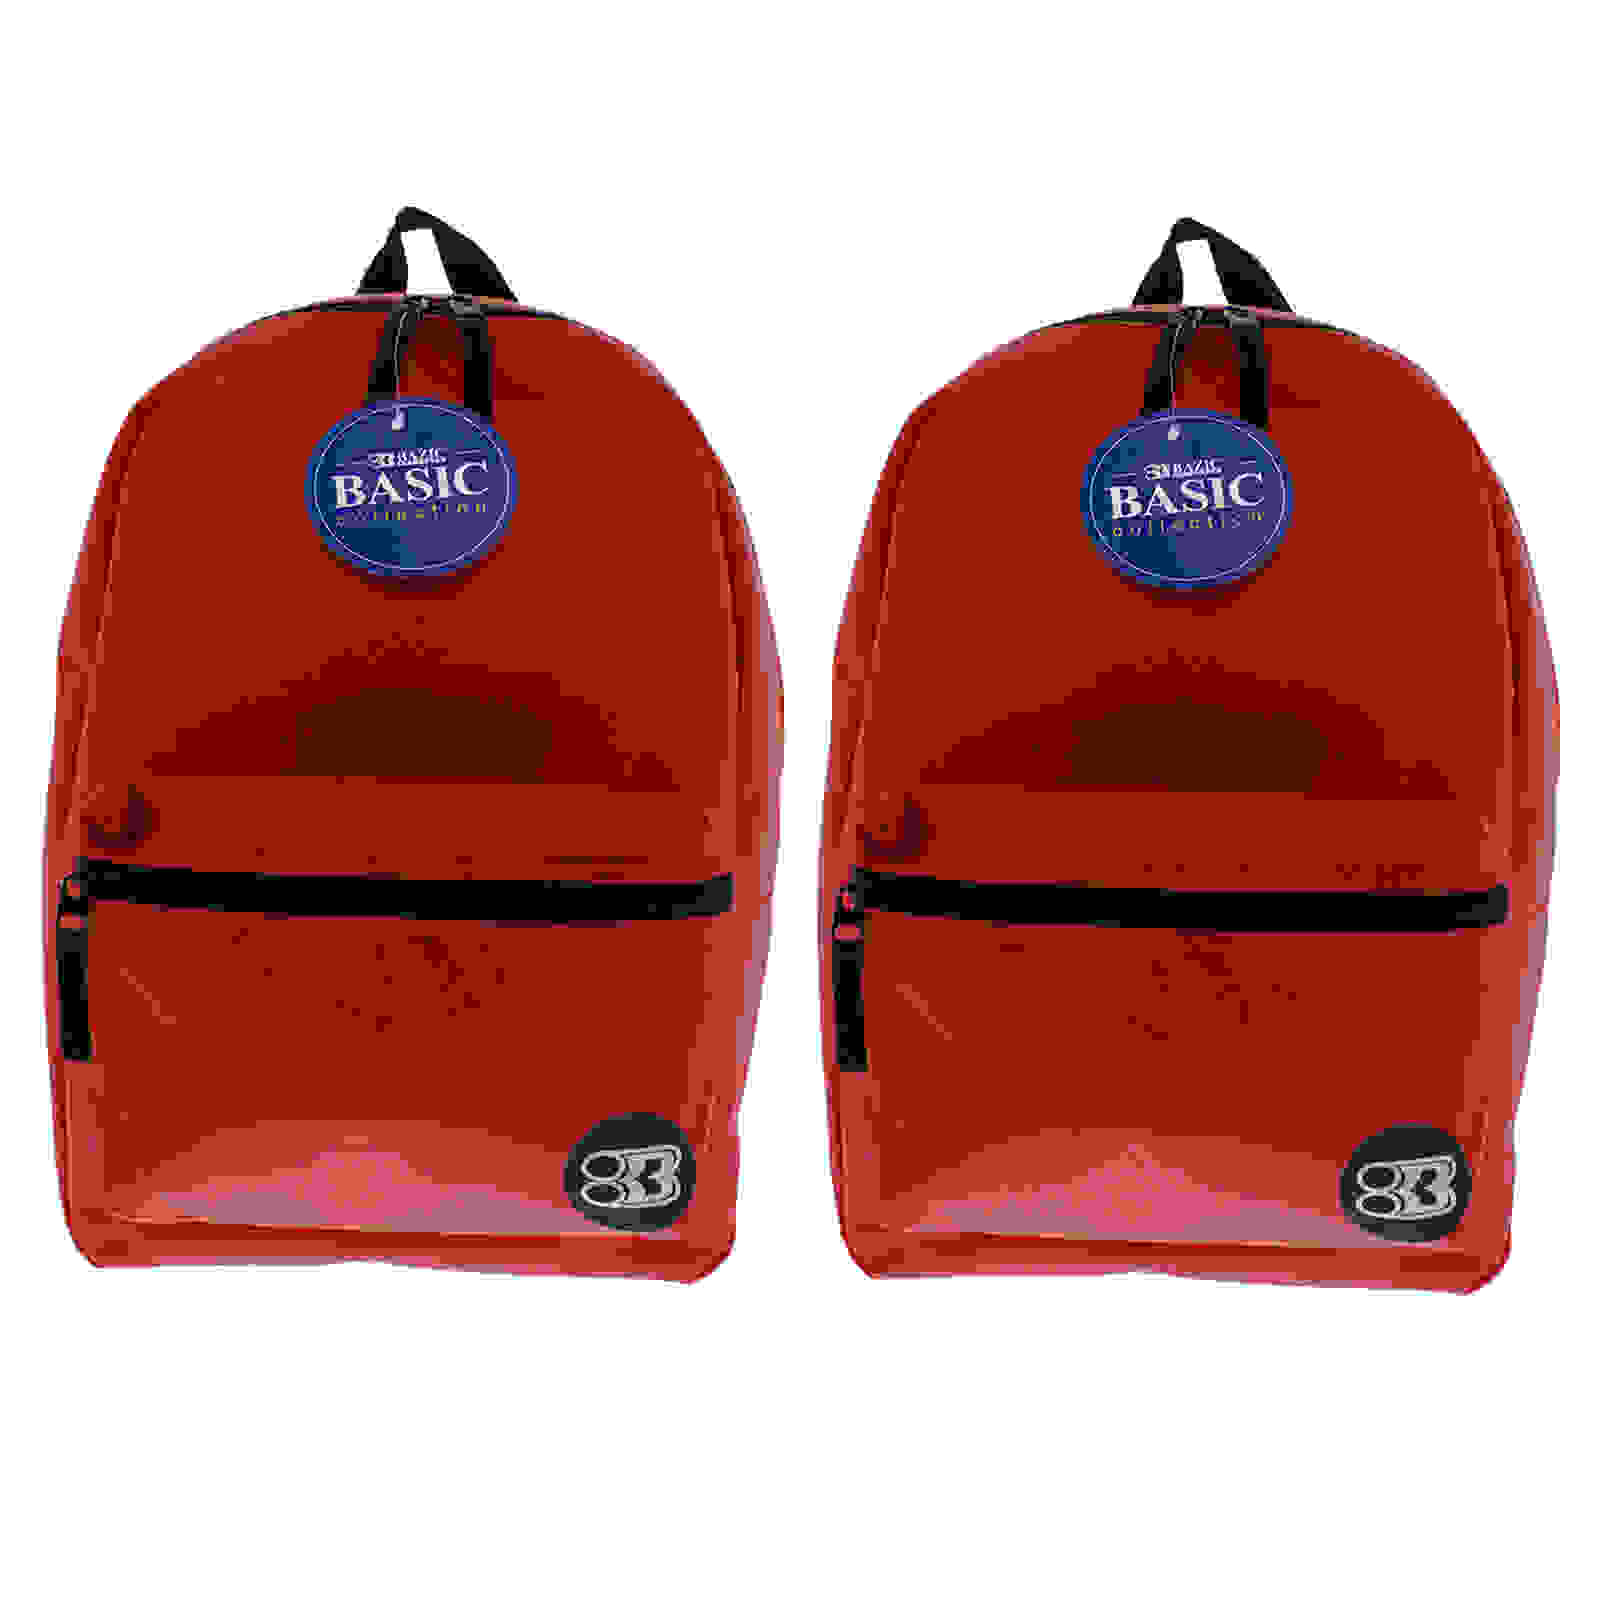 Basic Backpack, 16", Red, Pack of 2